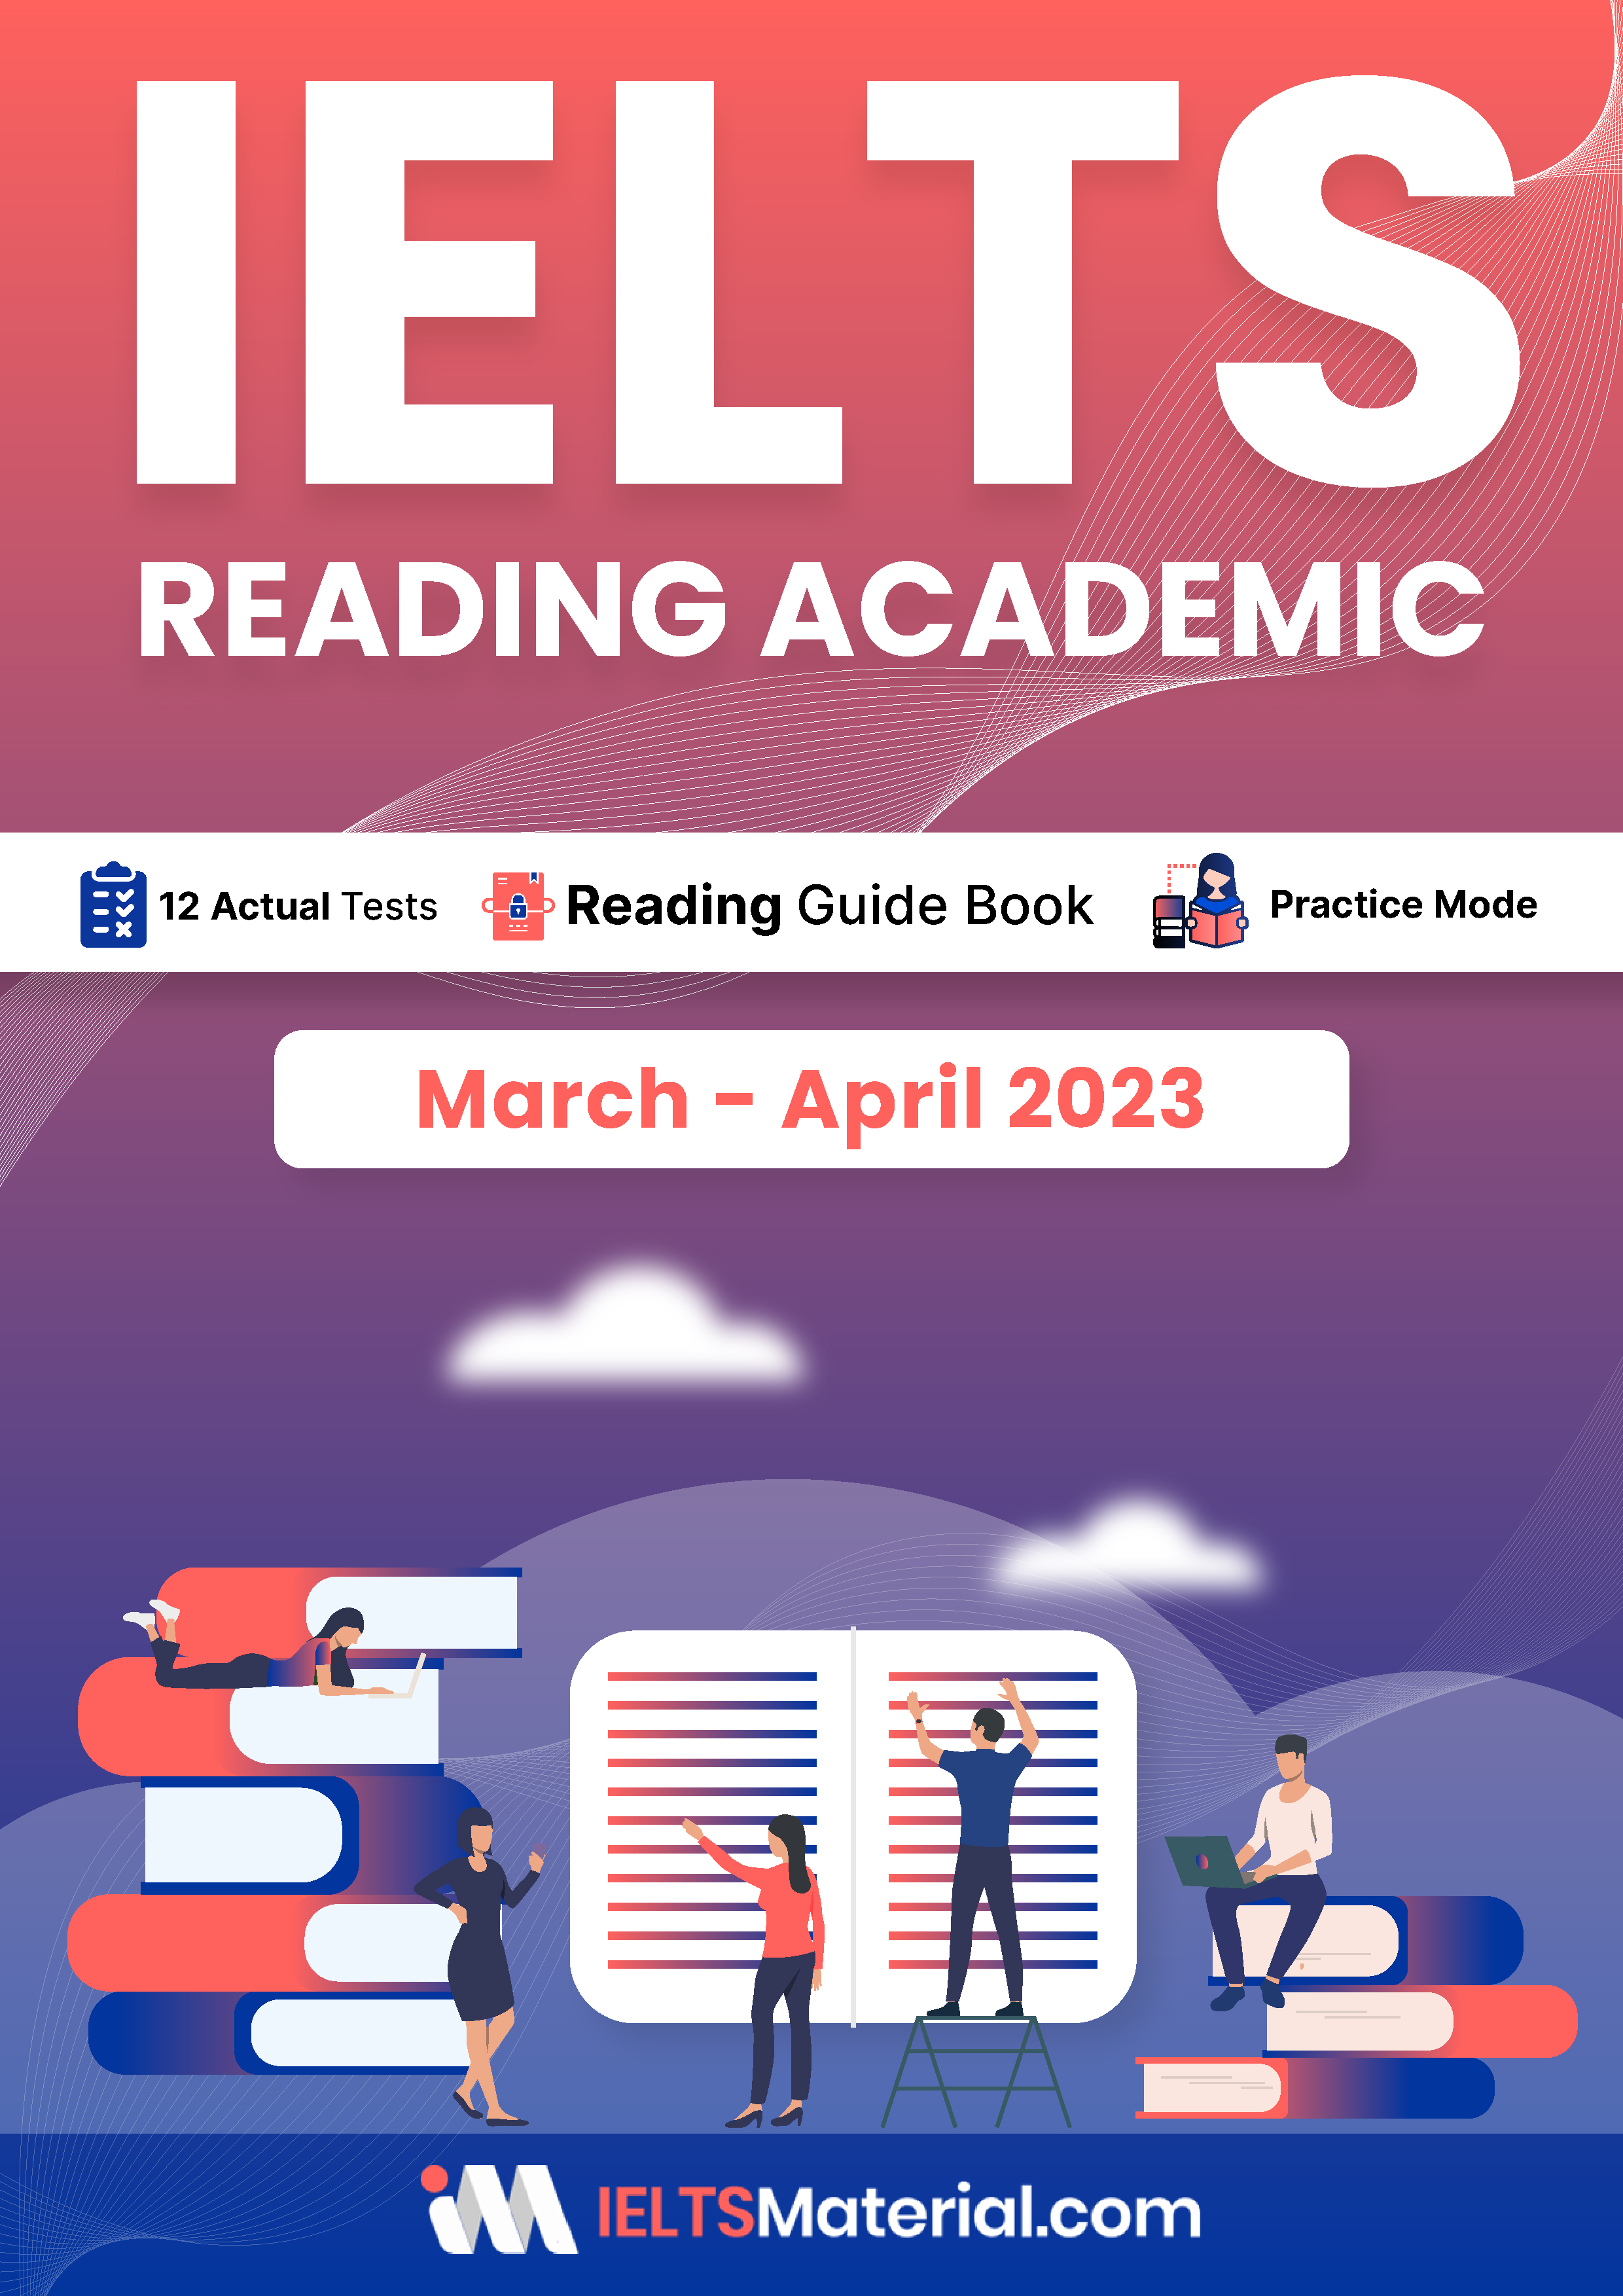 IELTS Reading Academic Test Guide: Essential Tips, Strategies, and Practice Tests